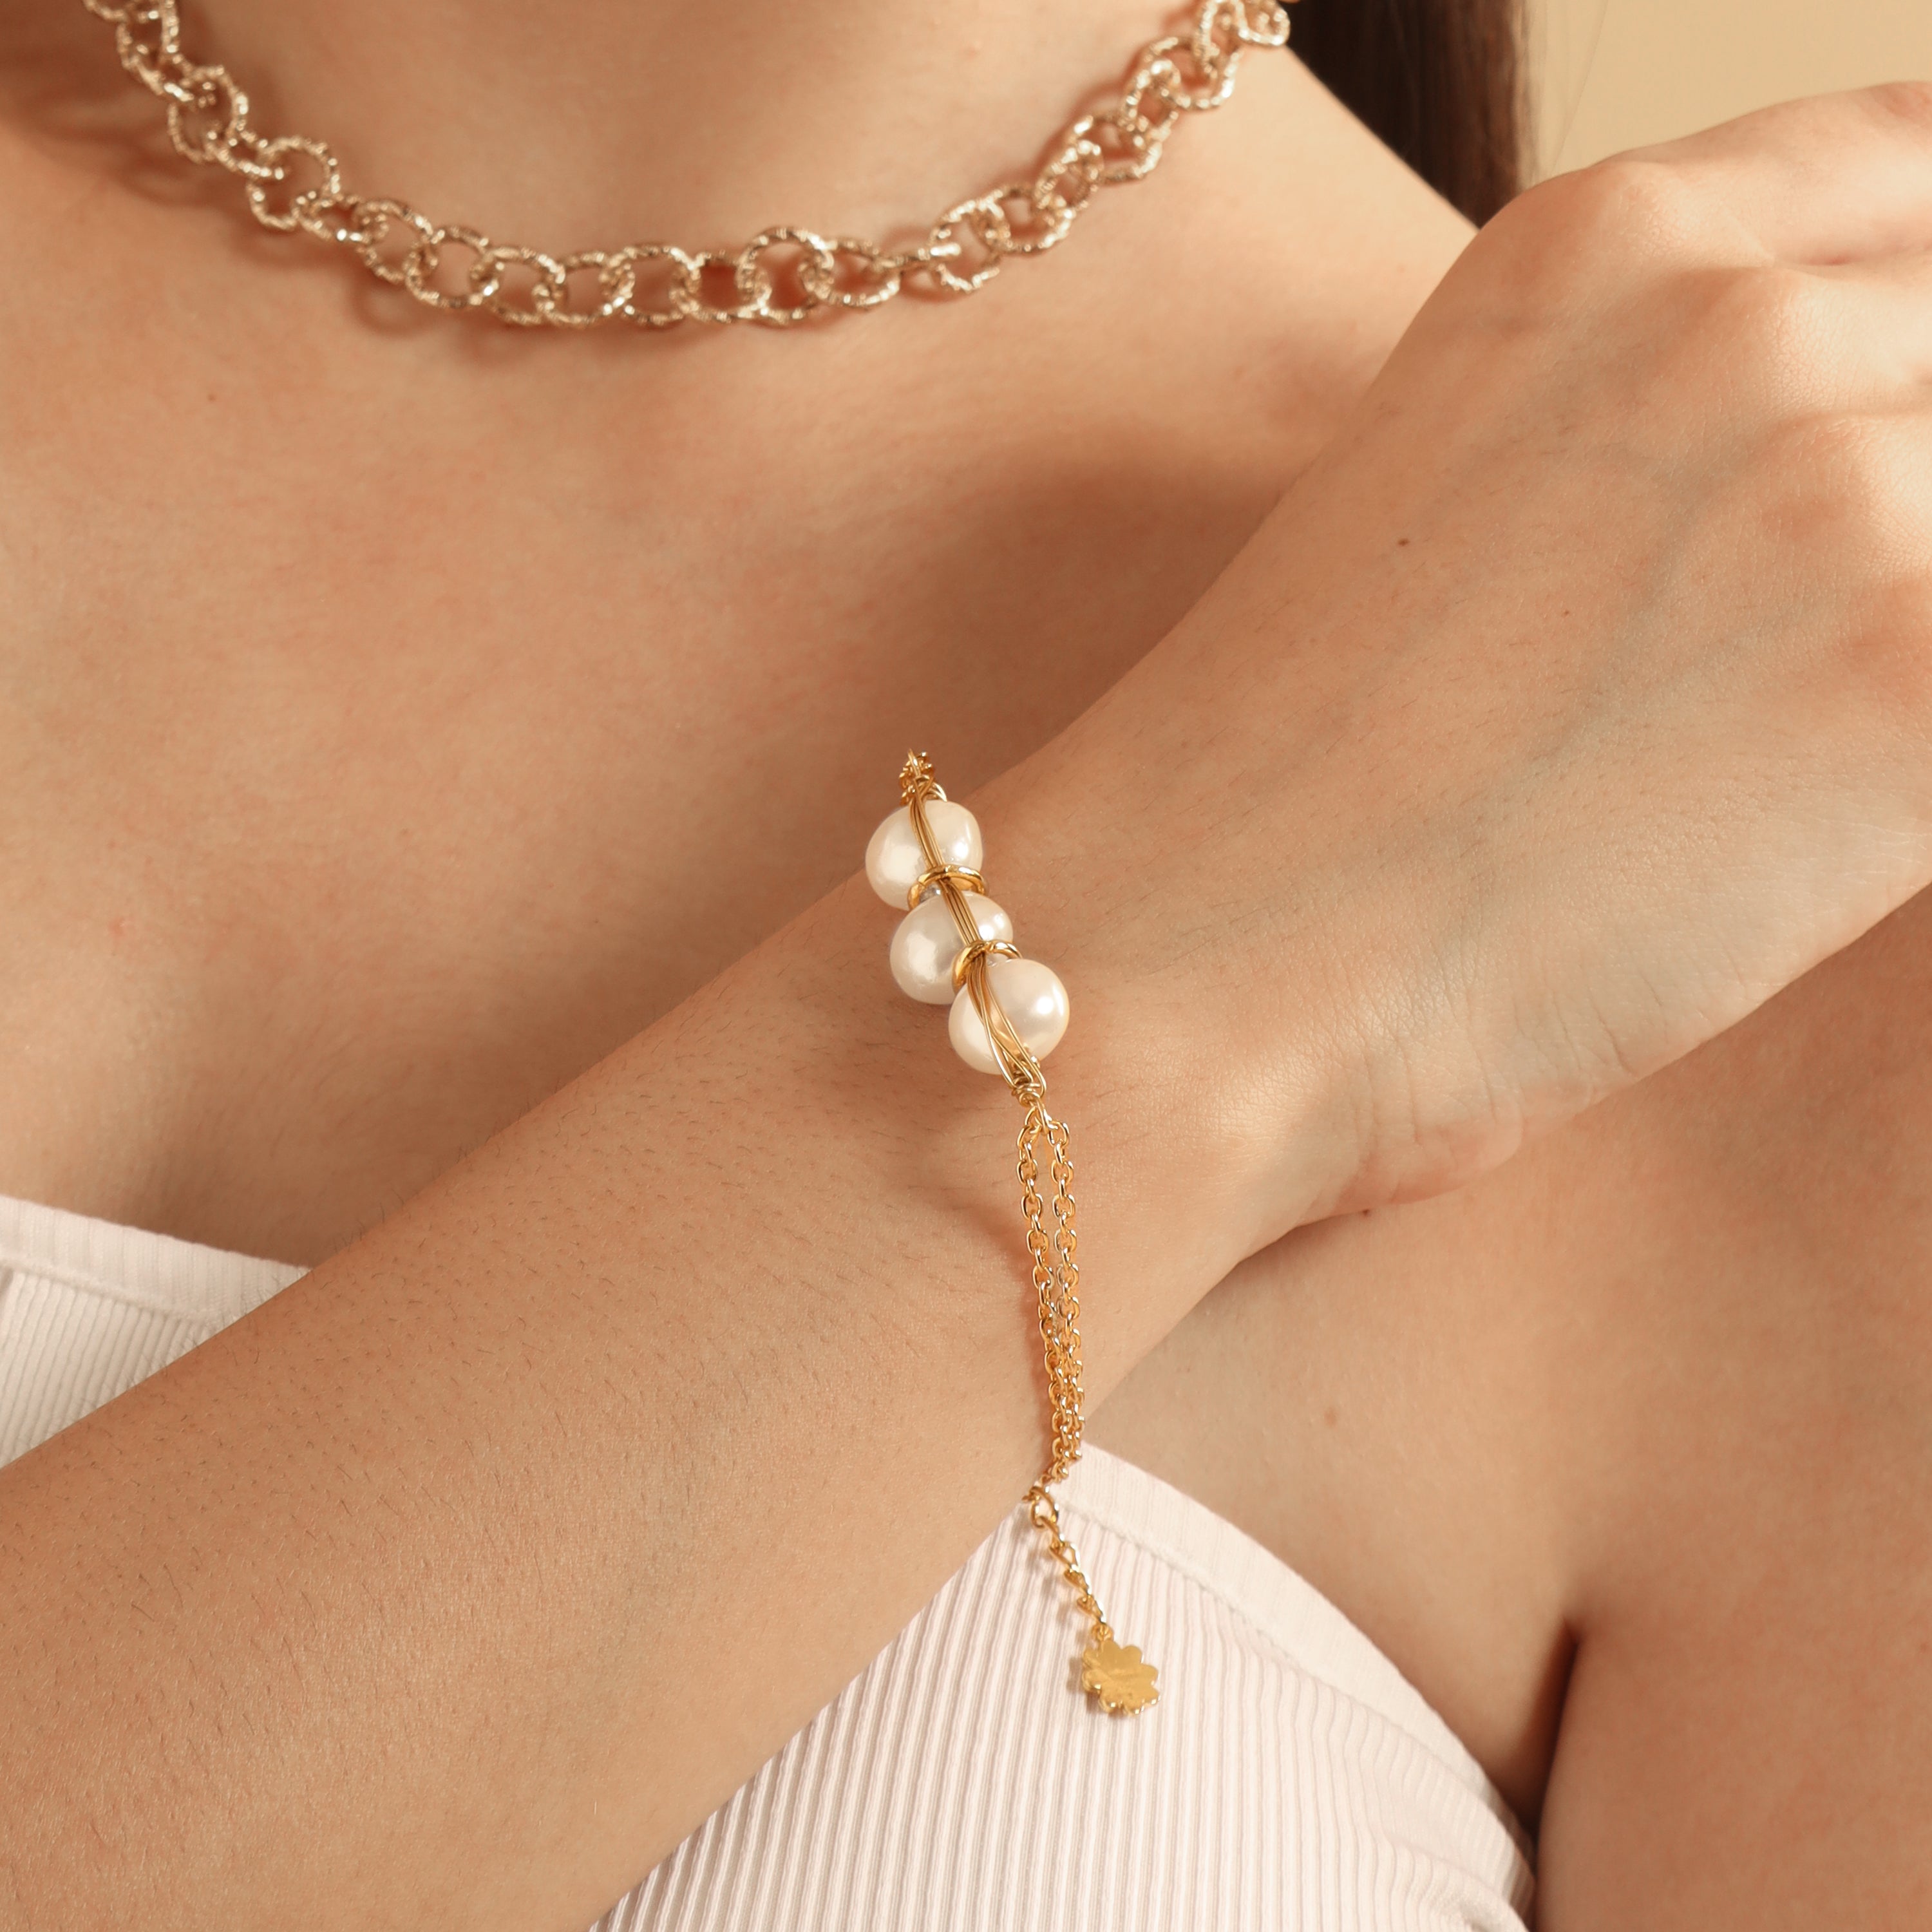 TFC Pearl Charm Gold Plated Bracelet-Discover our stunning collection of stylish bracelets for women, featuring exquisite pearl bracelets, handcrafted beaded bracelets, and elegant gold-plated designs. Enjoy cheapest anti-tarnish fashion jewellery and long-lasting brilliance only at The Fun Company